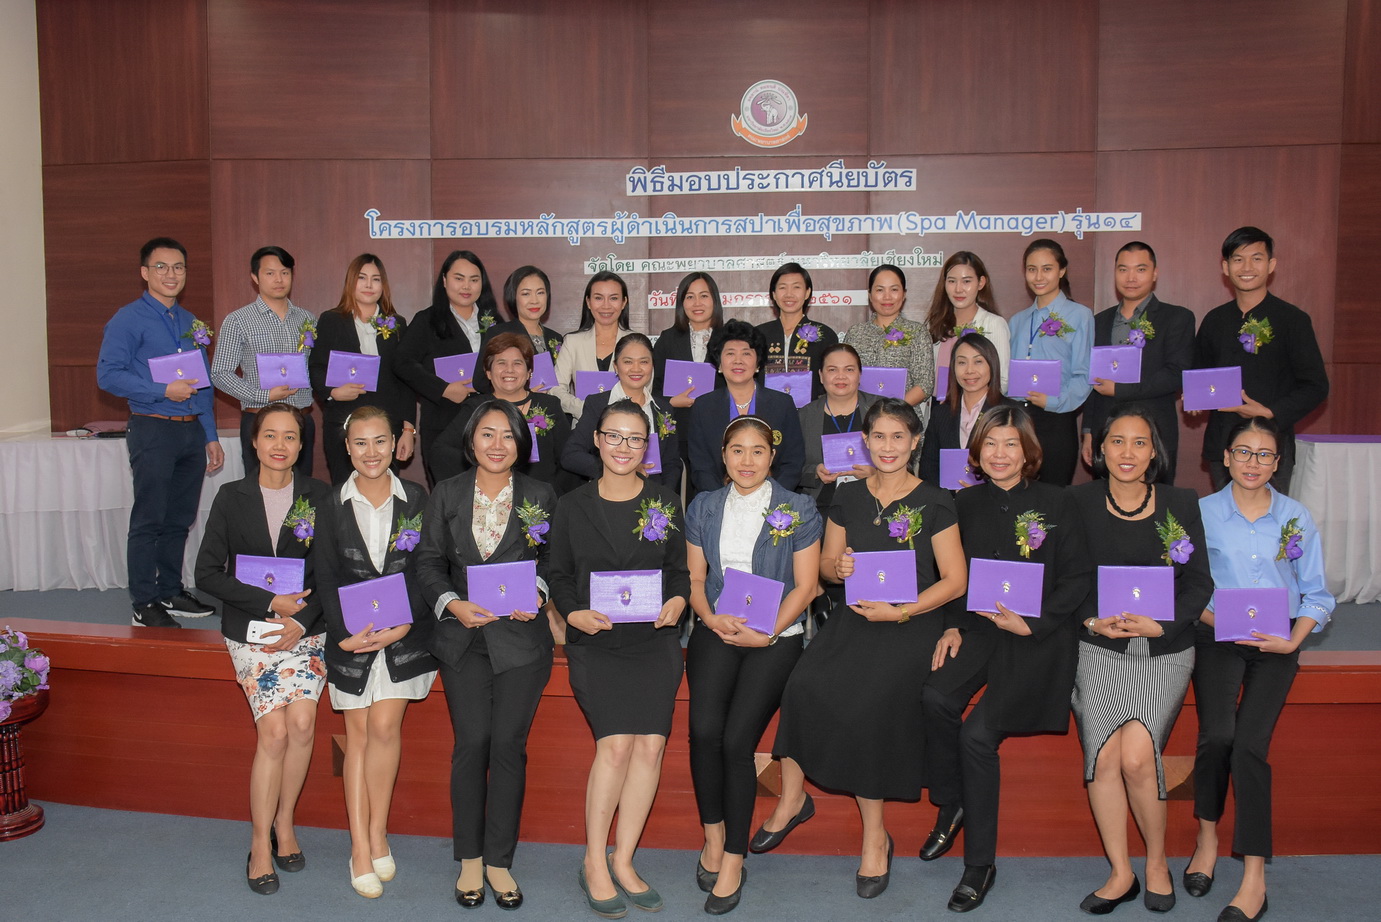 
	Certificate Giving Ceremony to Participants in the Training Program on Spa Manager
